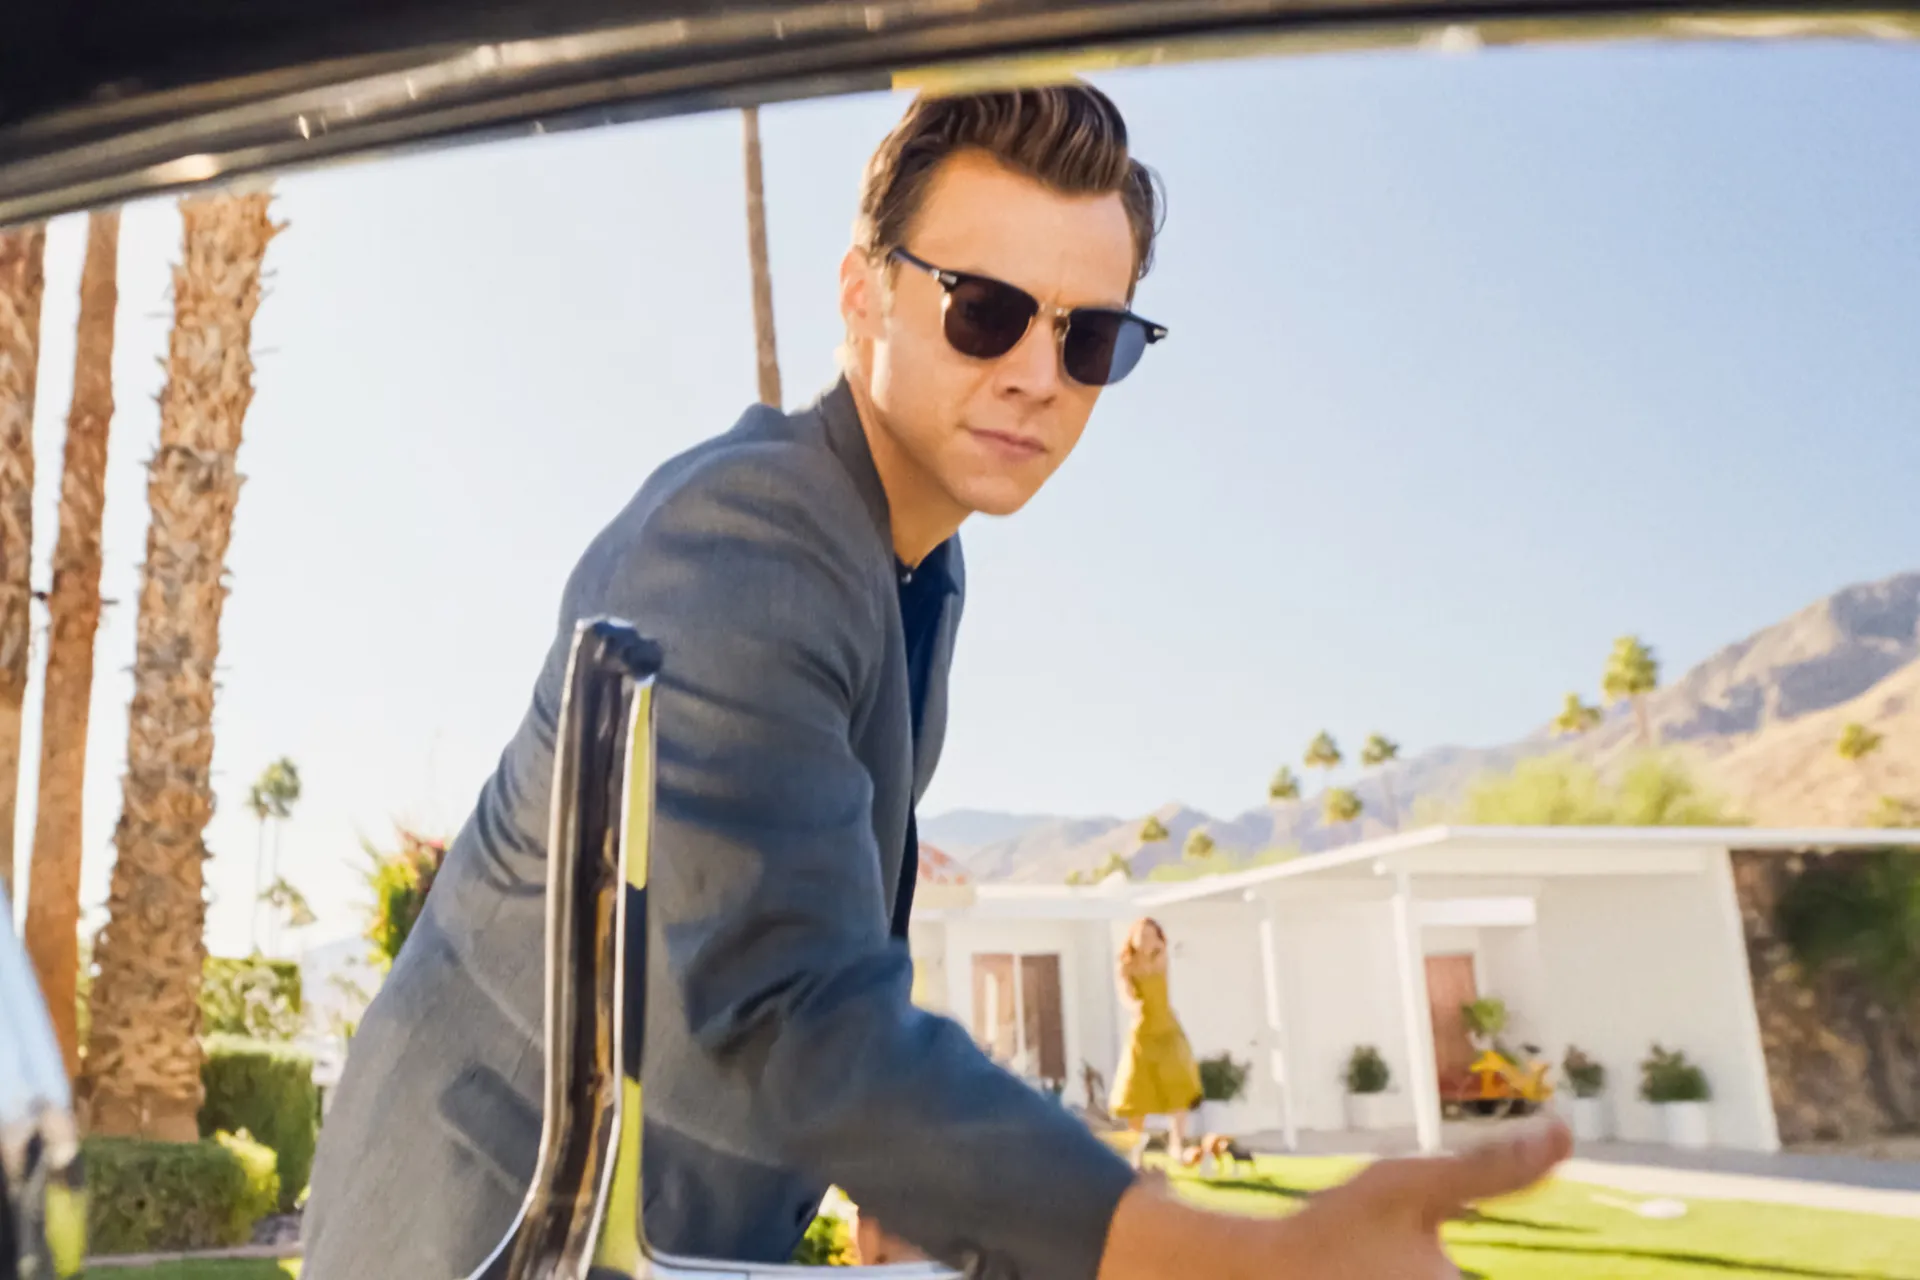 A still from Don't Worry Darling of Harry Styles as Jack dressed in a suit and sunglasses offering his hand to someone as they step out of a car into a sunny 1950s suburb